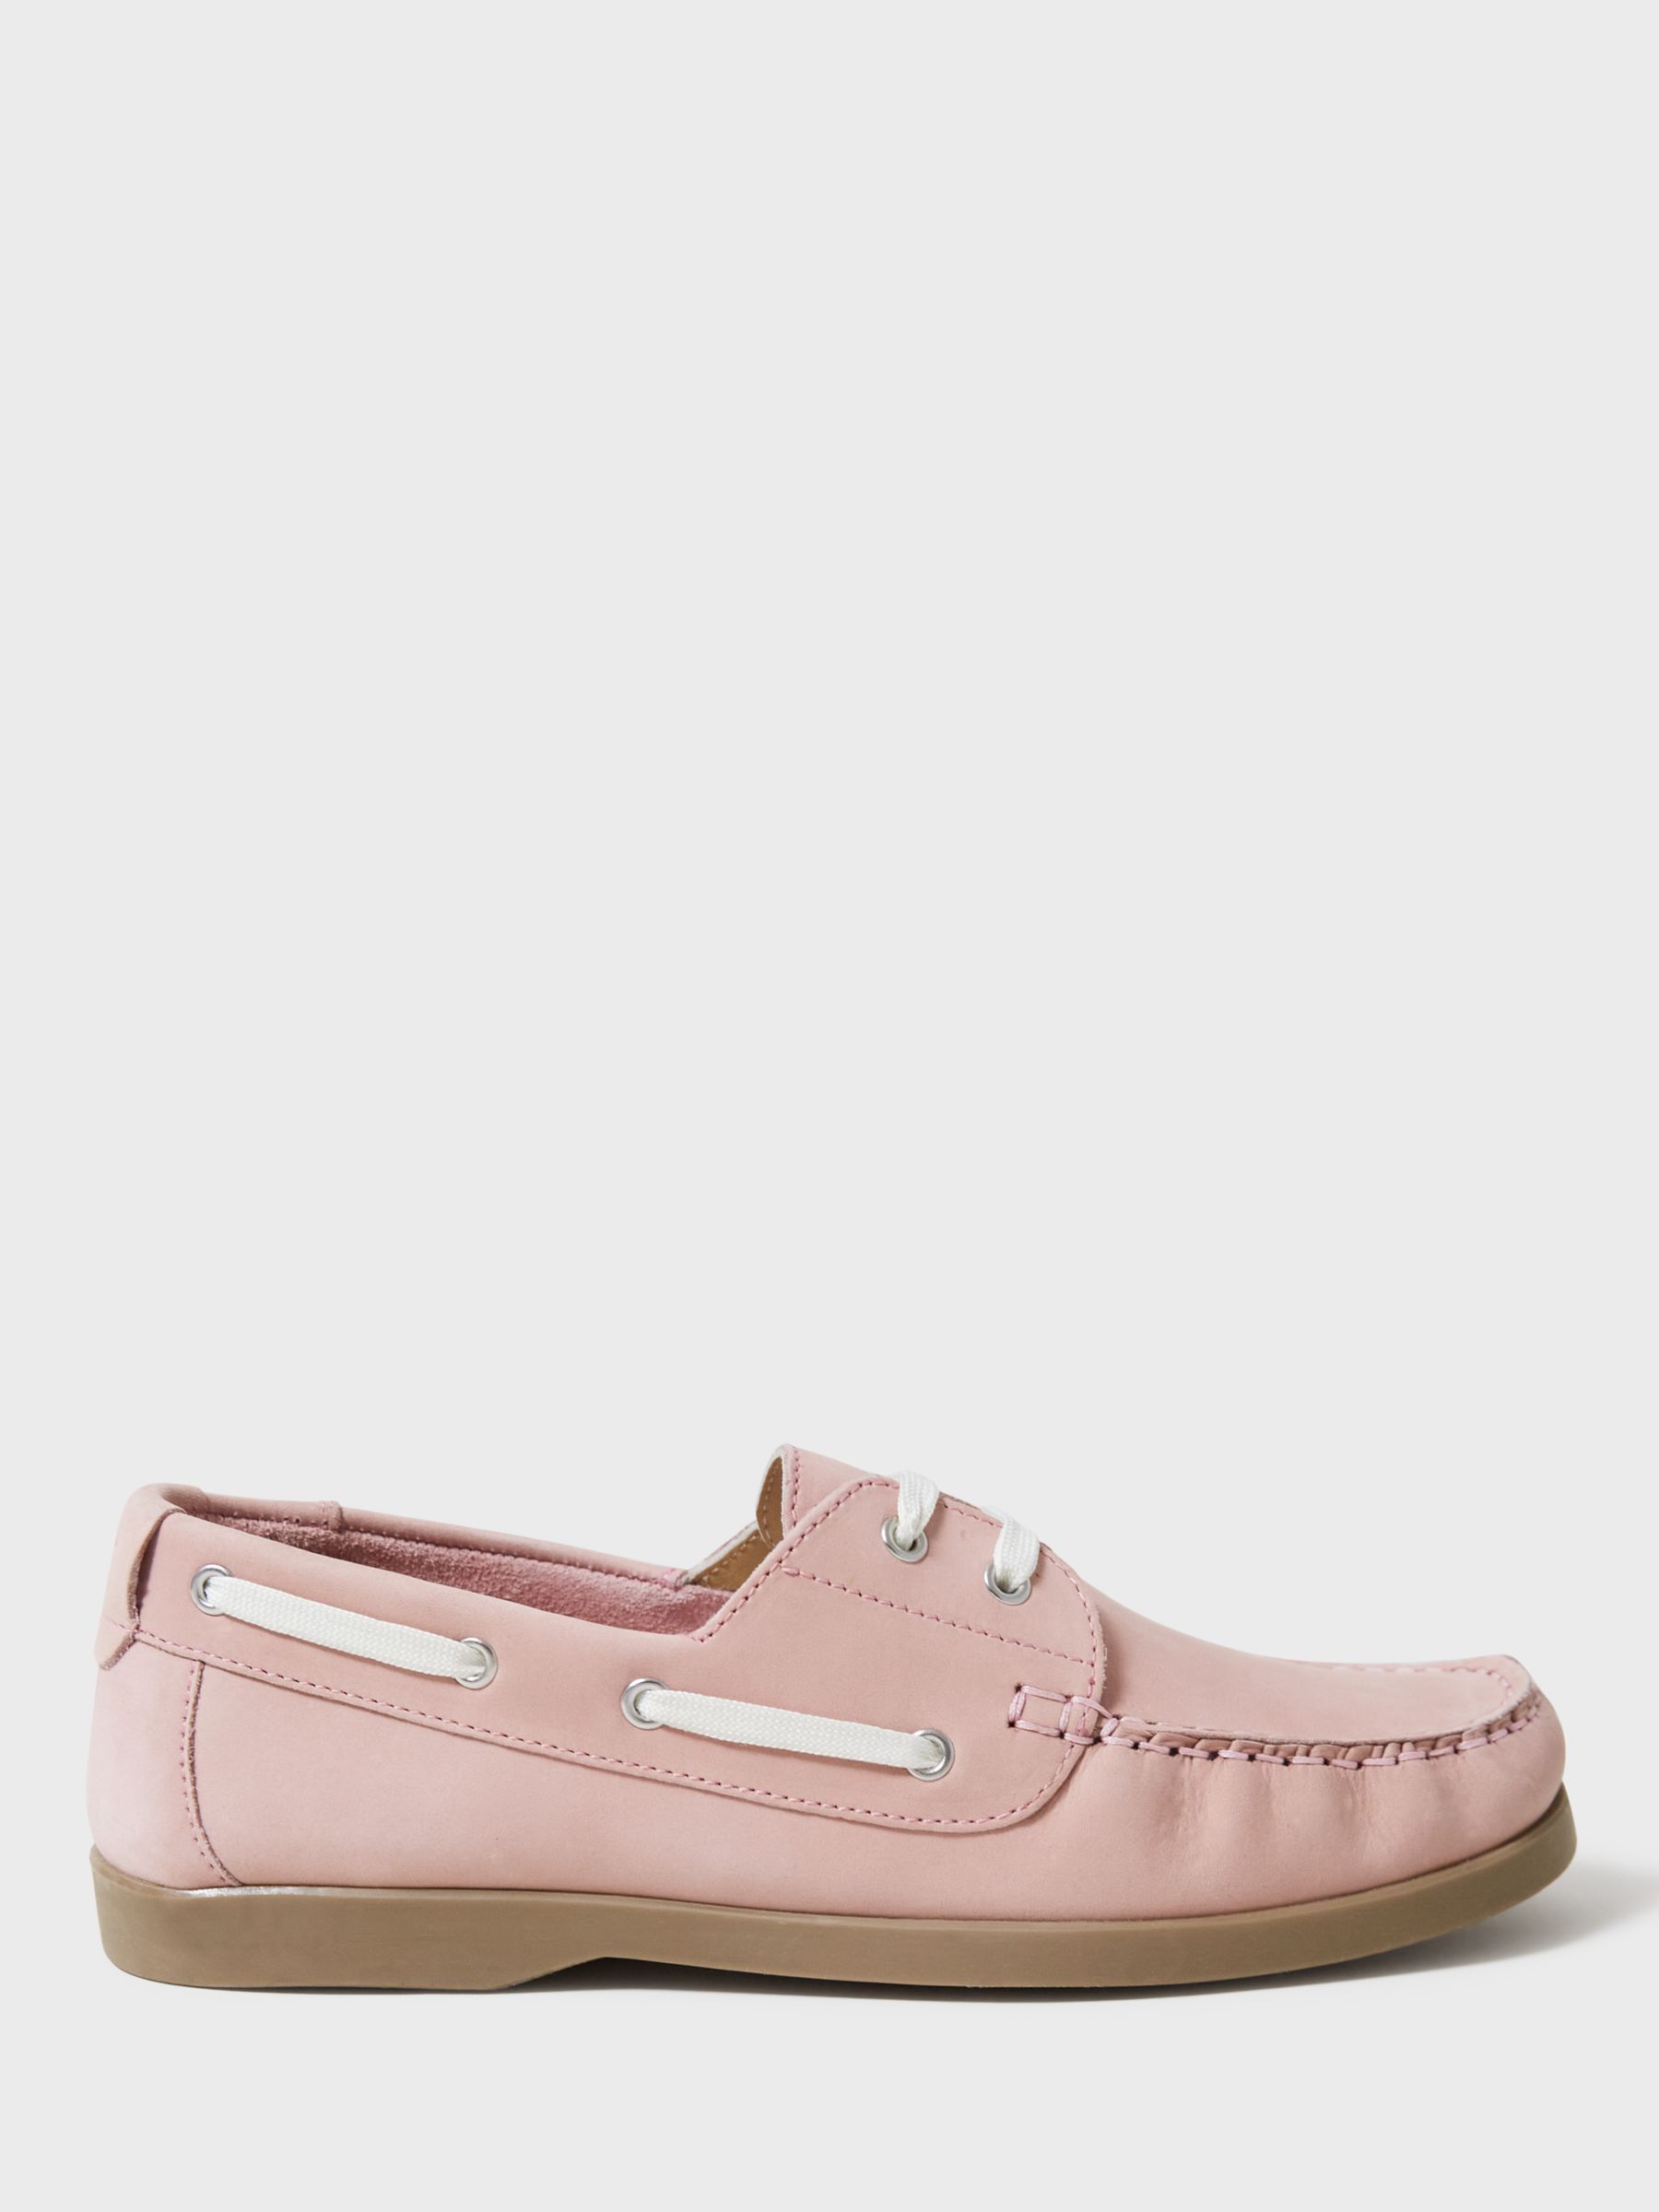 Crew Clothing Classic Leather Deck Shoes, Rose Pink at John Lewis ...